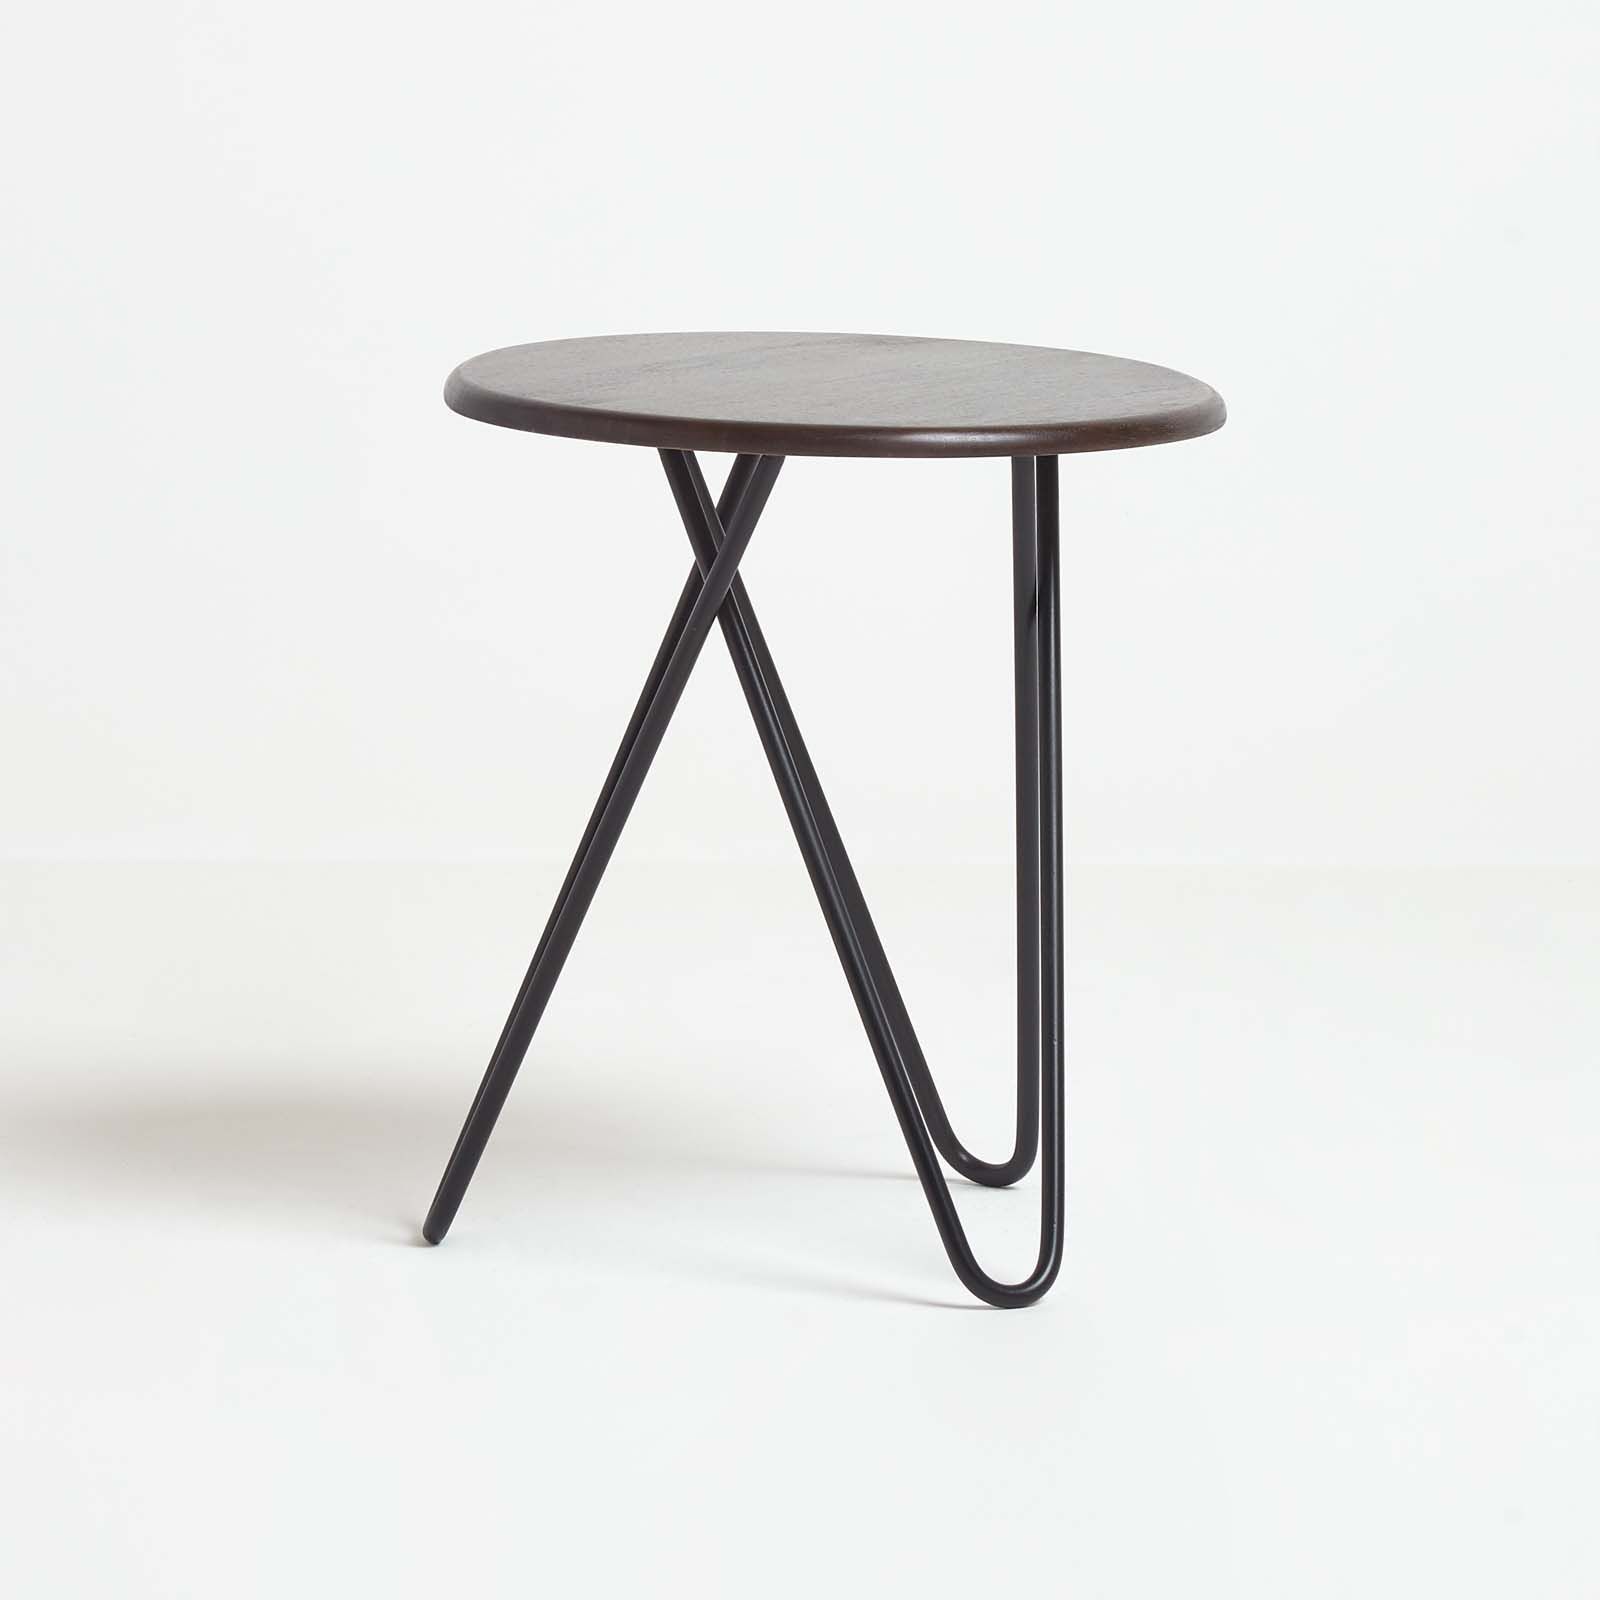 Widely Used Coffee Tables With Tripod Legs With Regard To Soho Hairpin Leg Side Table, Dark (Gallery 3 of 20)